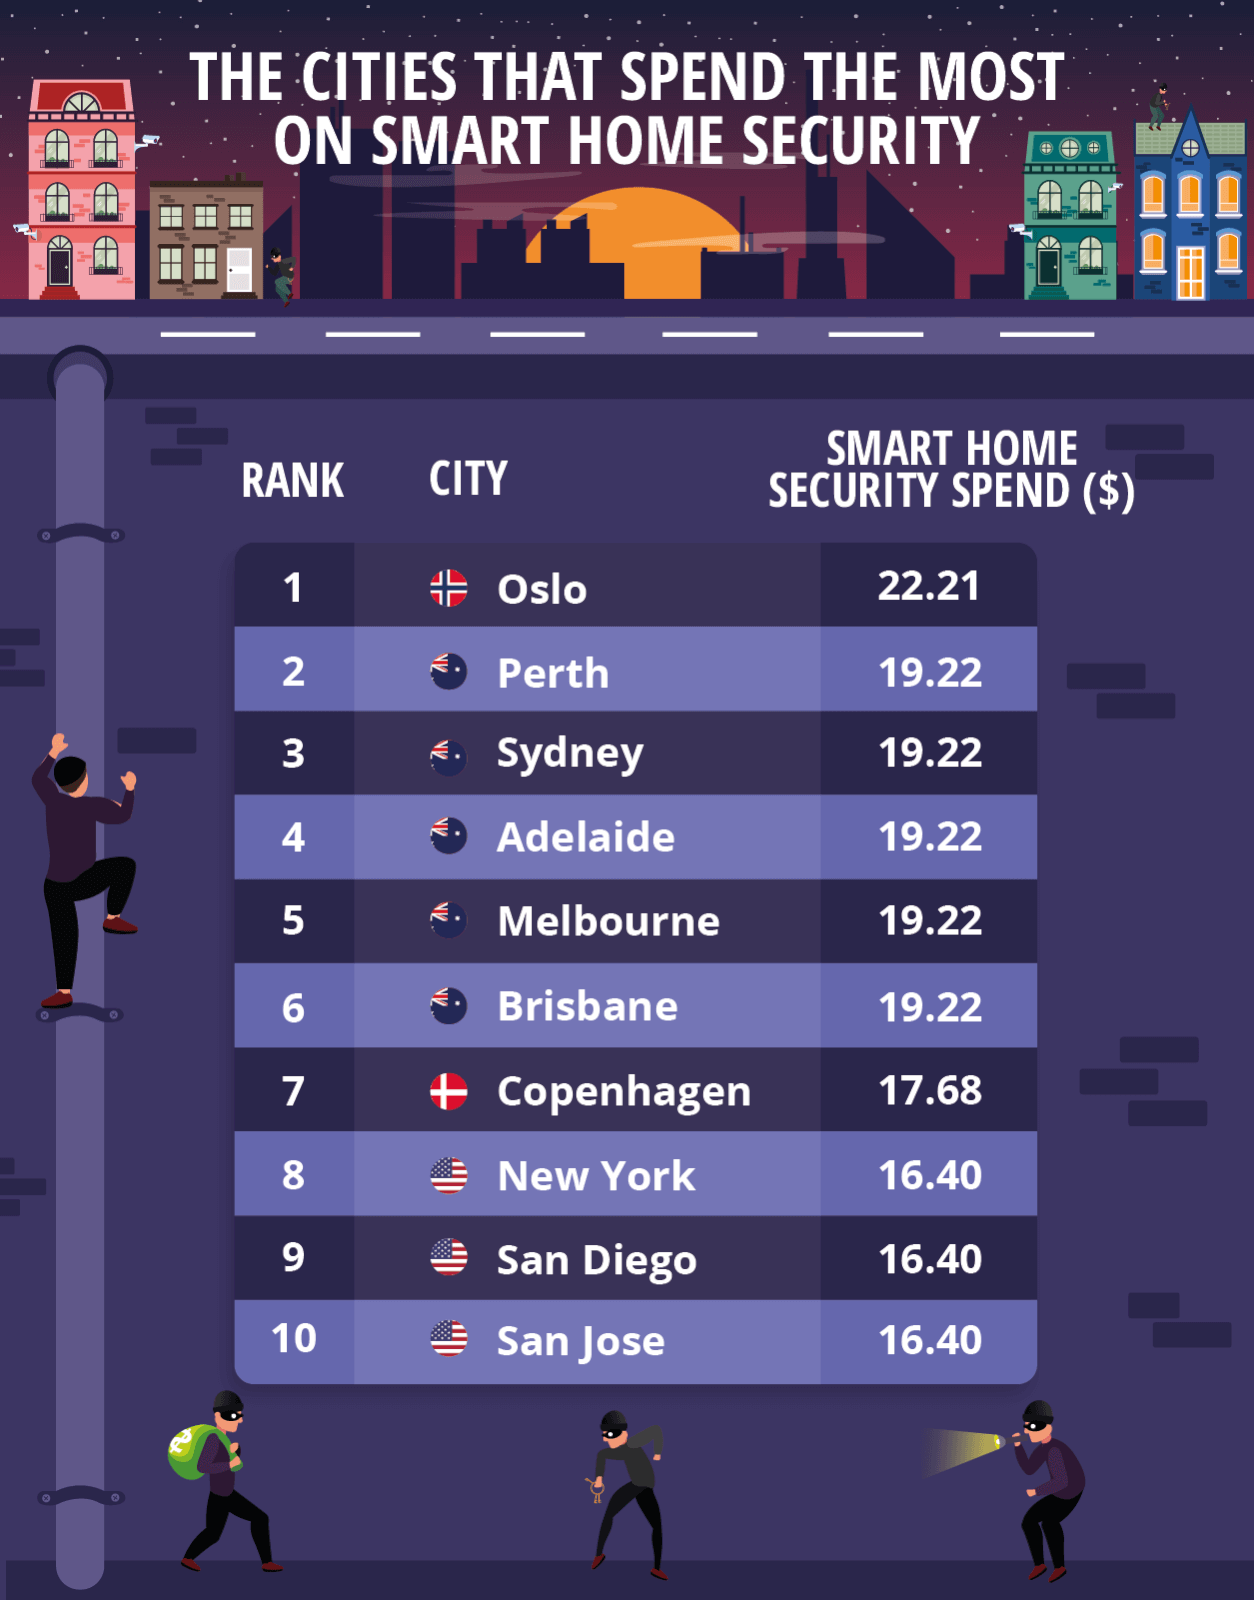 Image showing the cities that spend the most on smart home security.